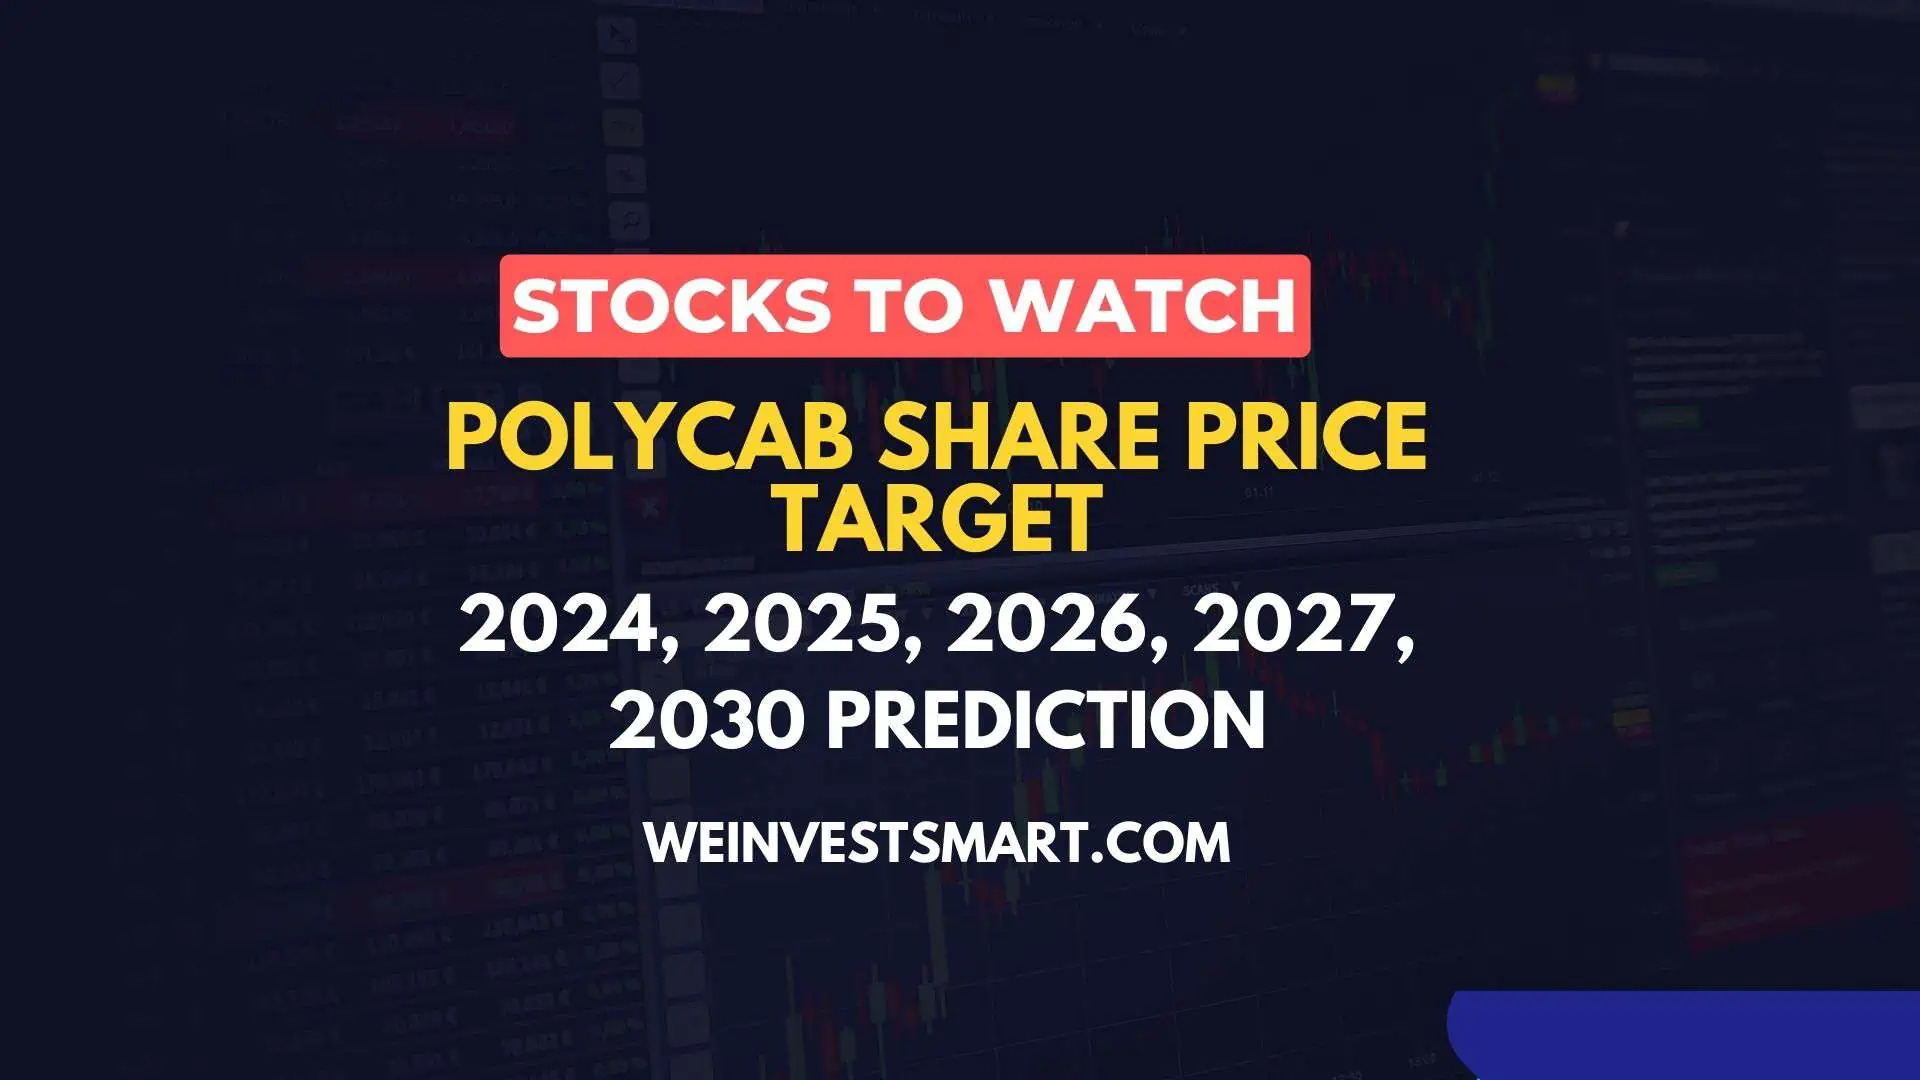 Polycab Share Price Target 2024, 2025, 2026, 2027, 2030 Prediction